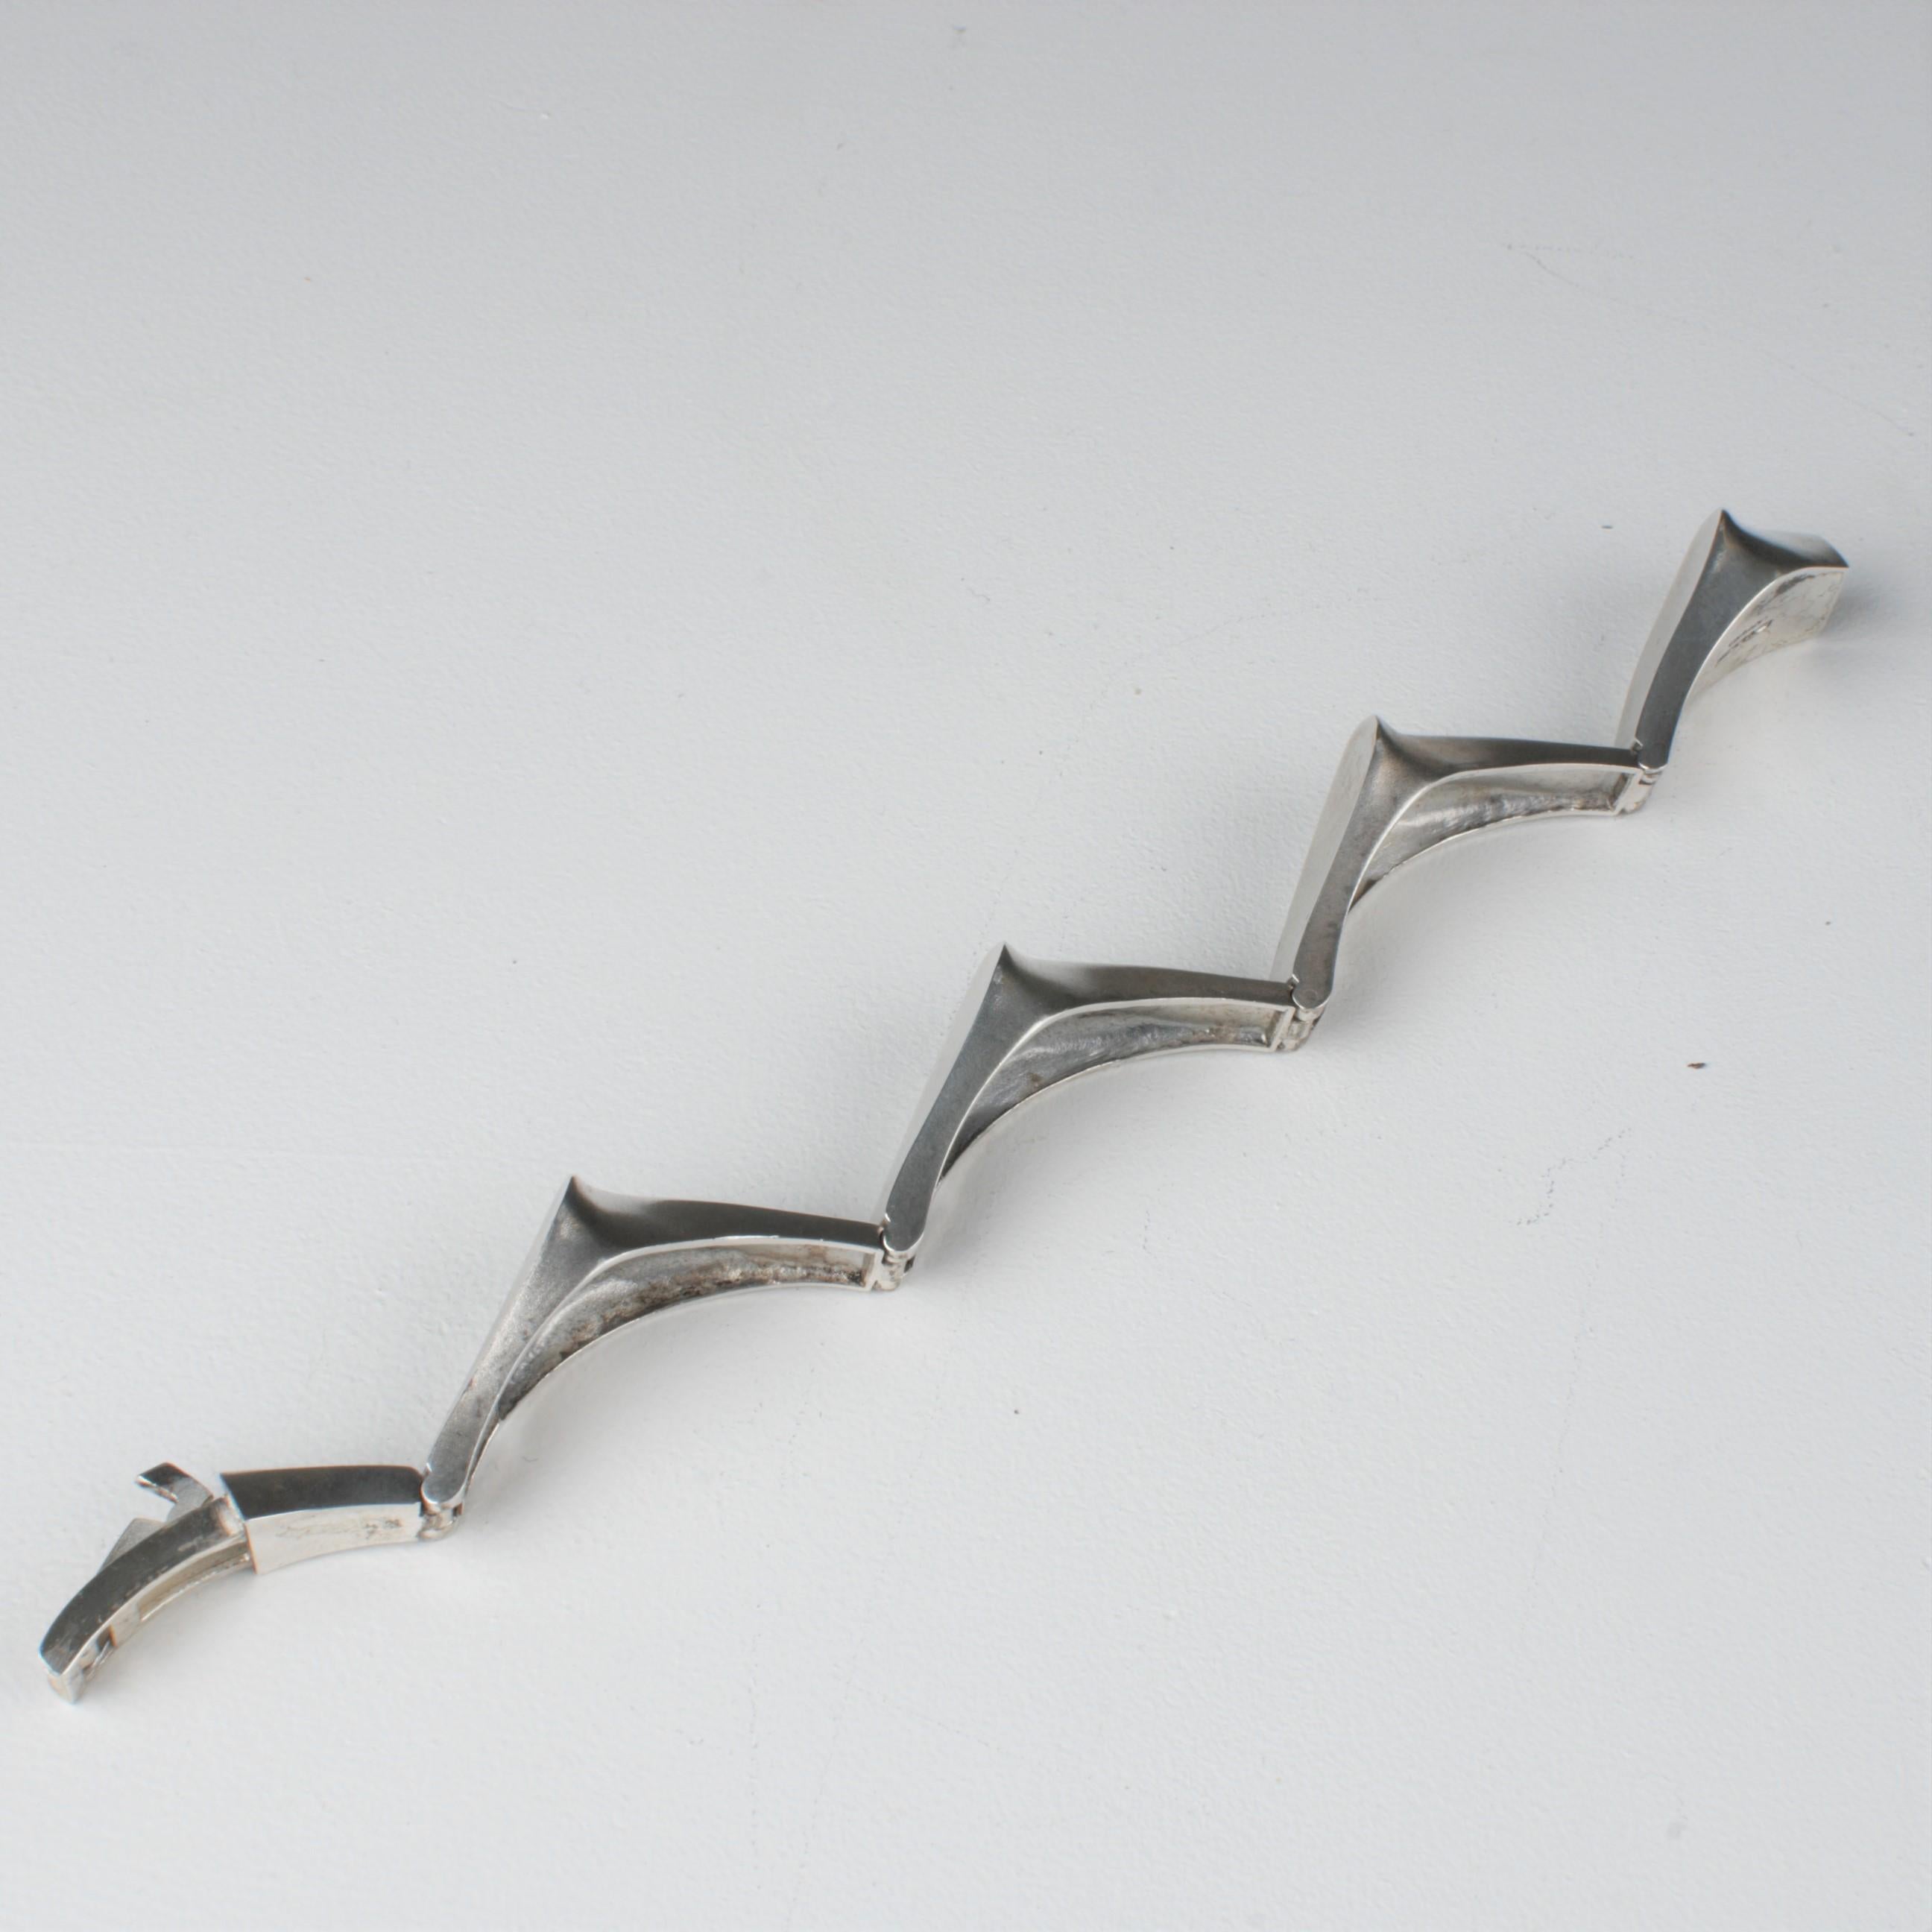 Late 20th Century Scandinavian Modern Bracelet in Silver by Lapponia, Finland For Sale